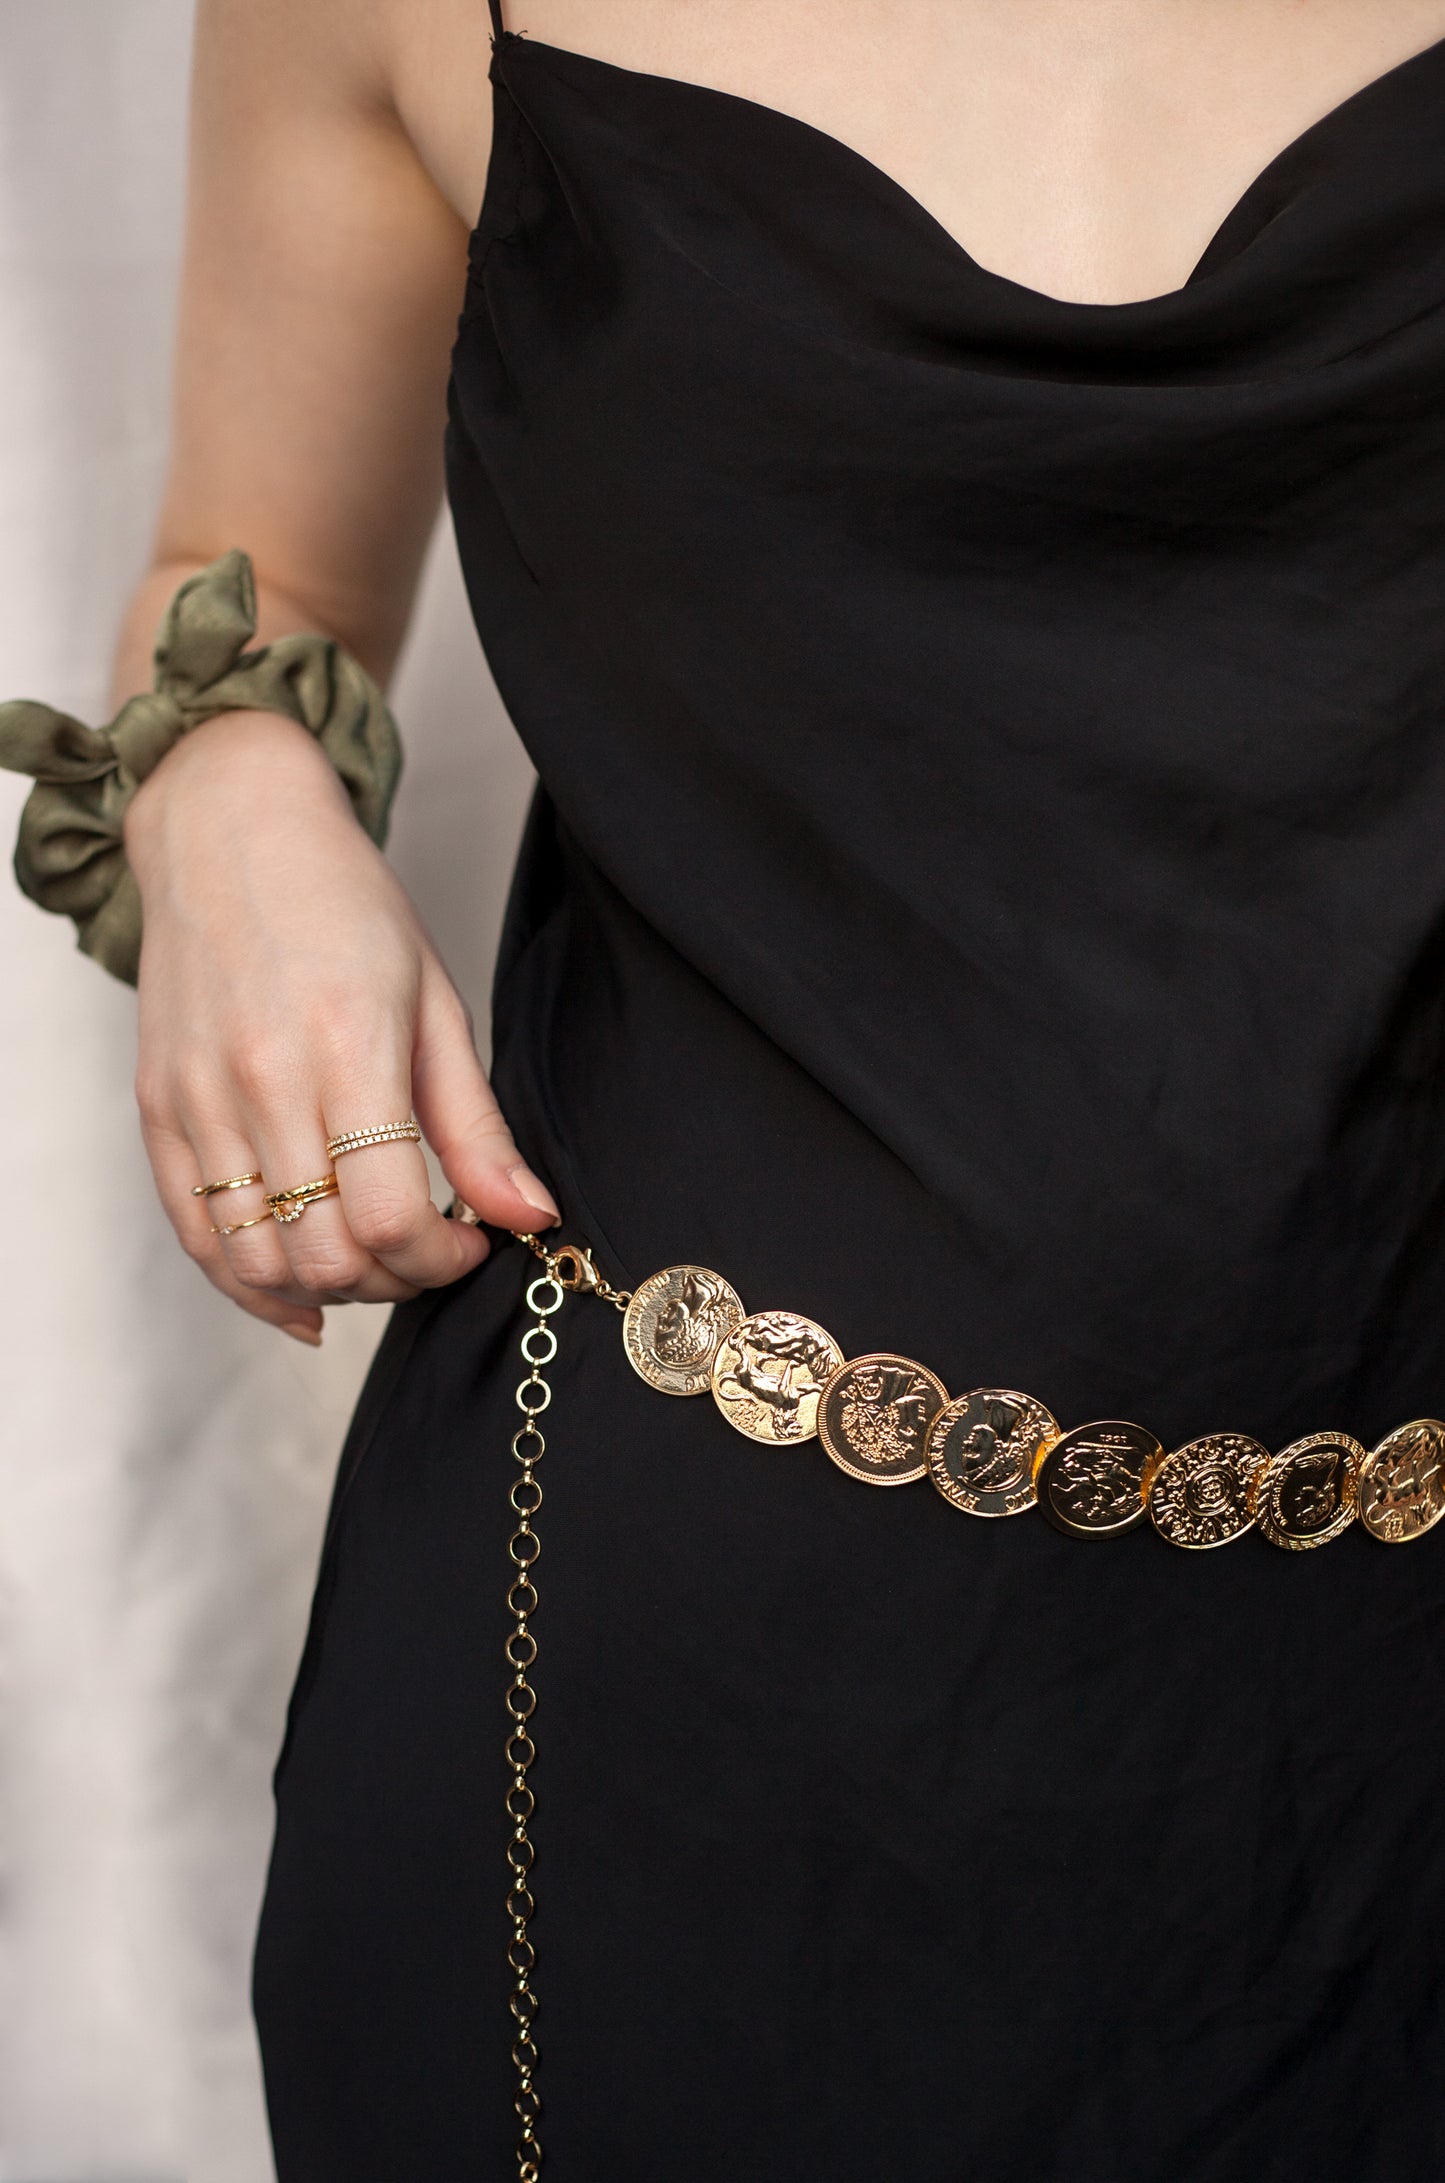 Roman Coin Statement Belt in Gold shown on a model  